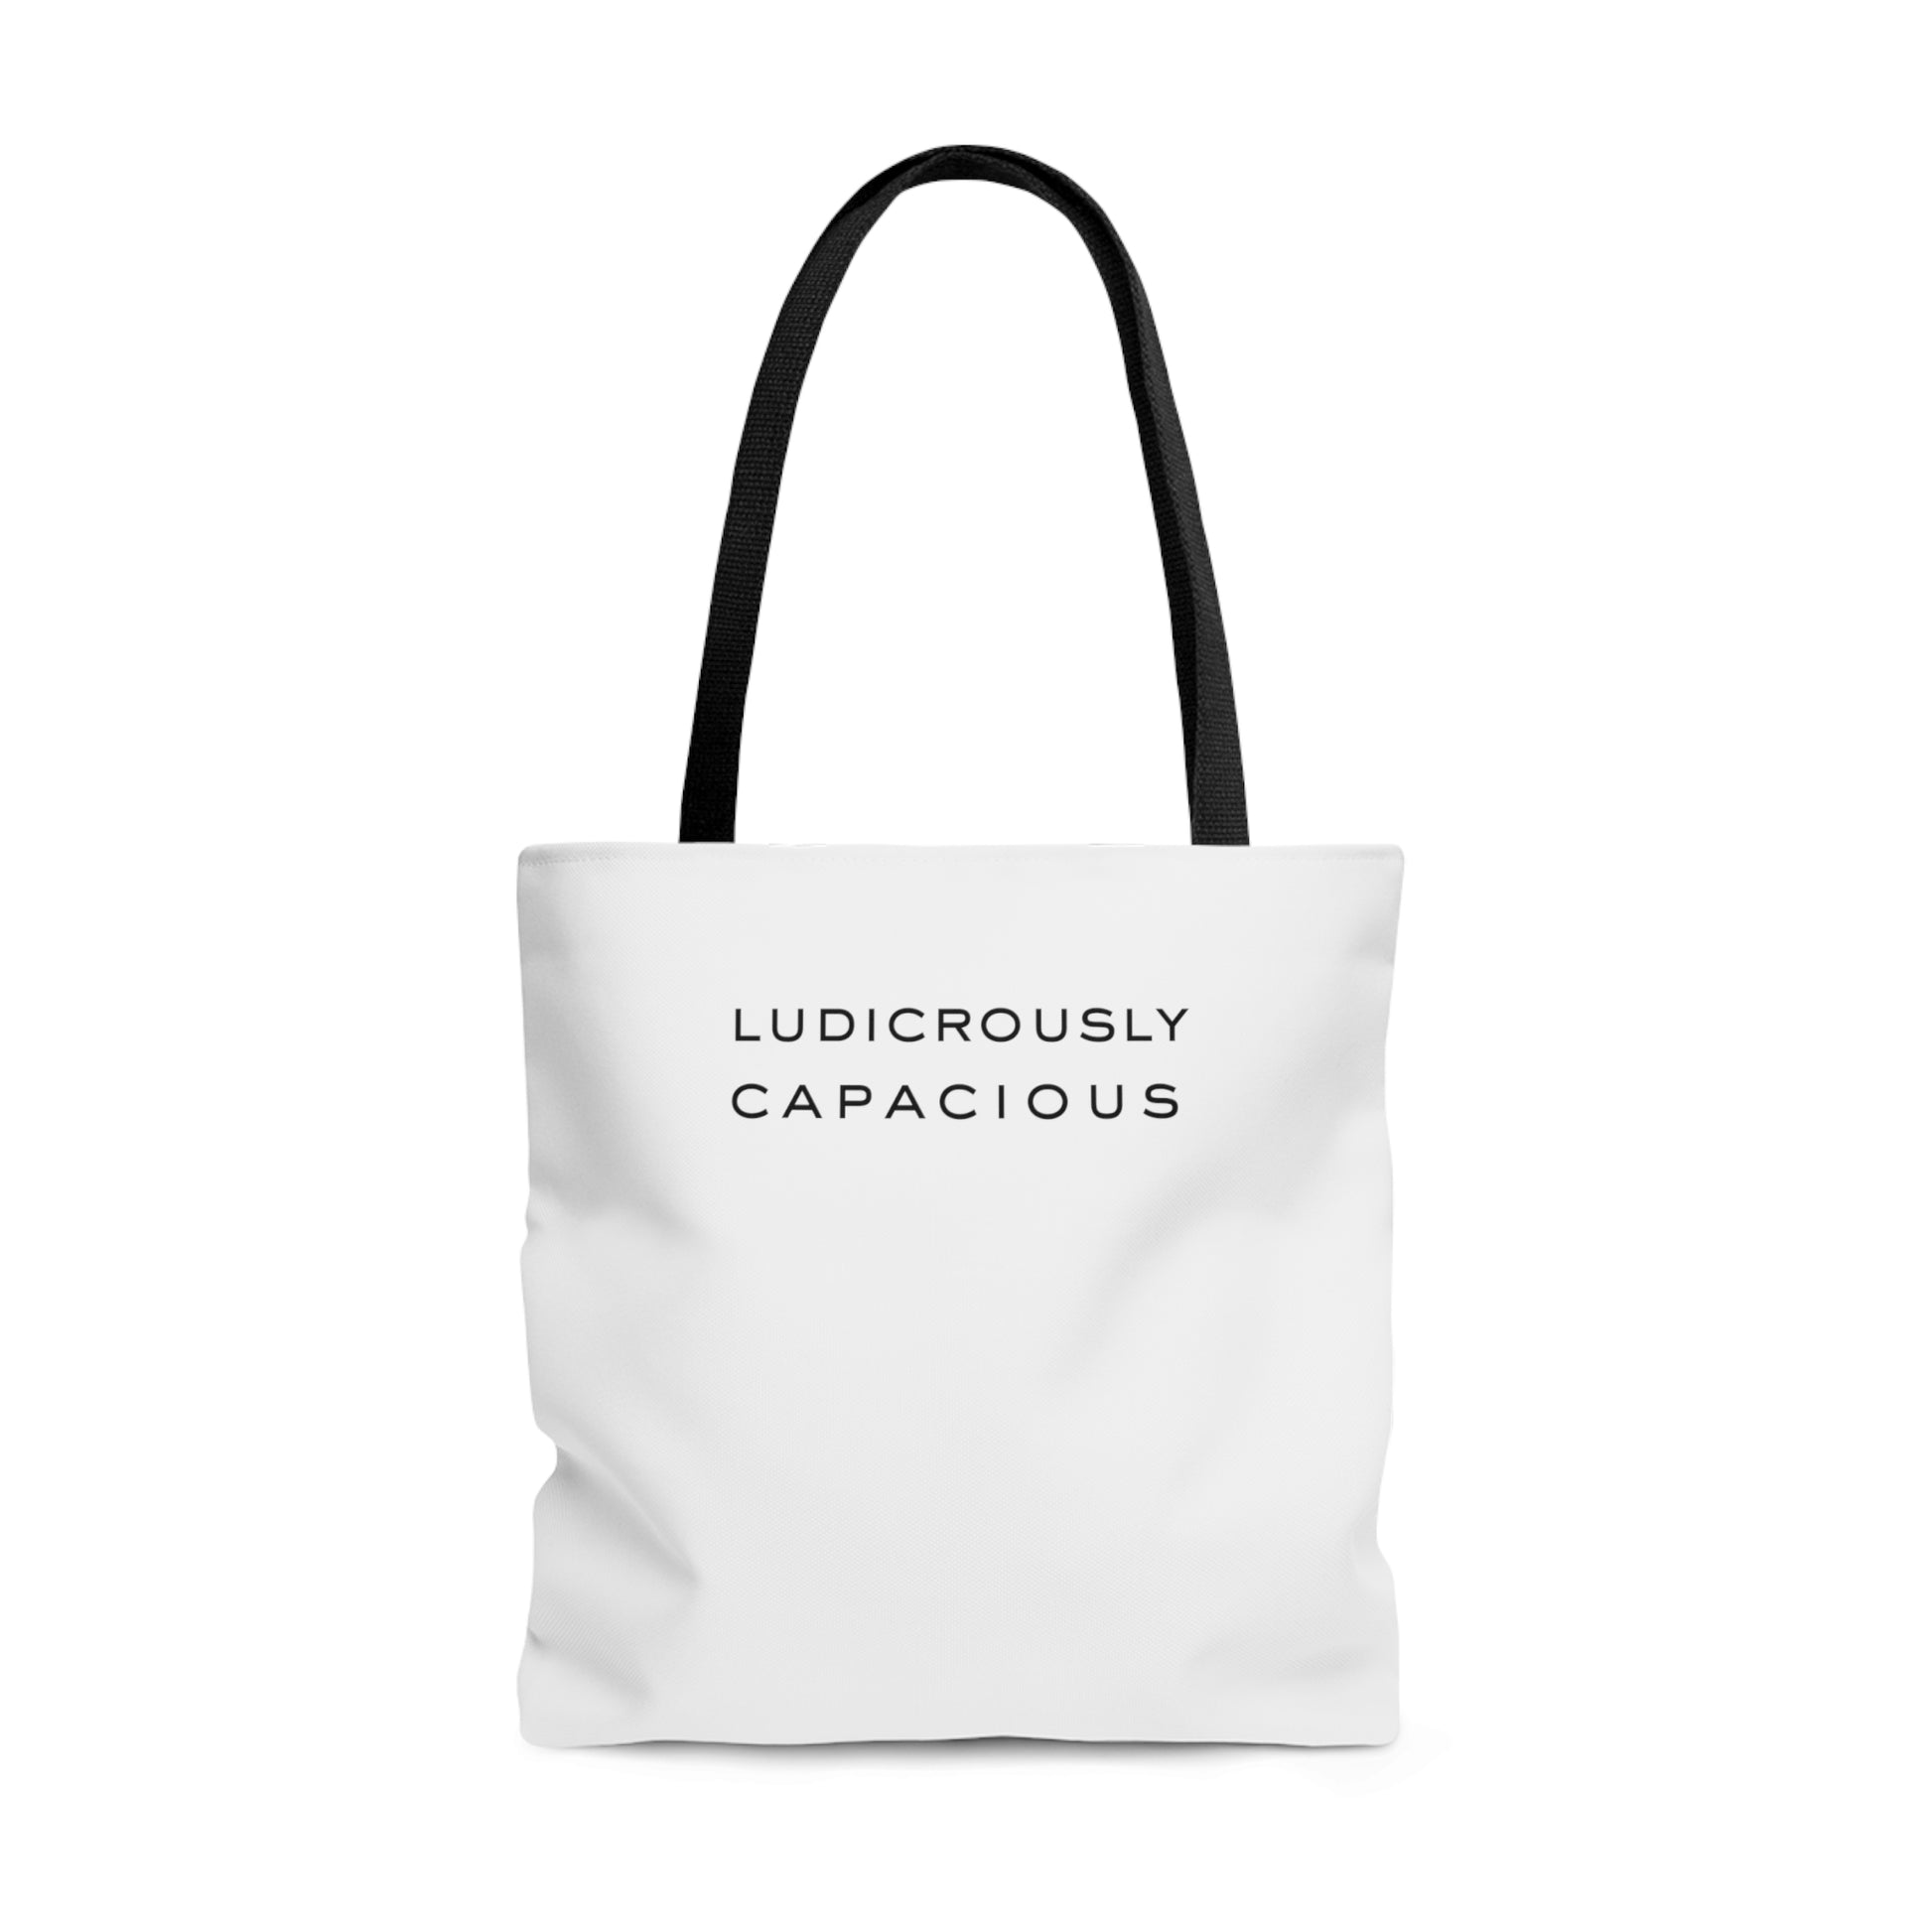 An unbiased size comparison between two ludicrously capacious totes —